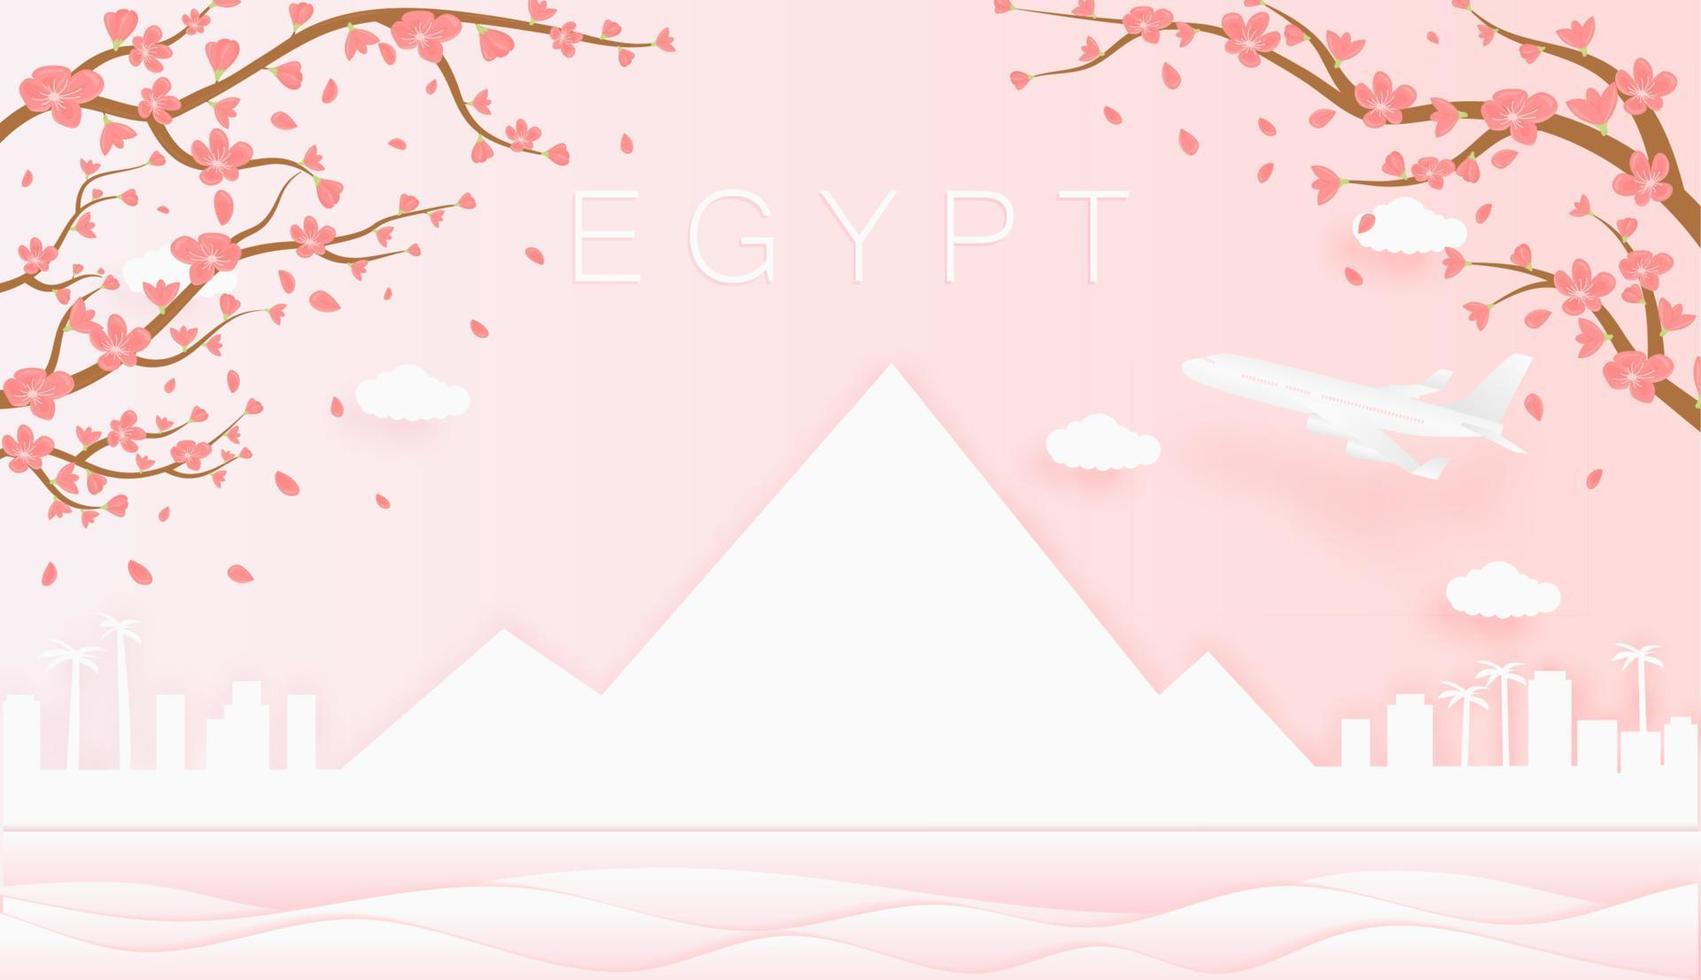 Panorama travel postcard, poster, tour advertising of world famous landmarks of Egypt, spring season with blooming flowers in tree vector icon